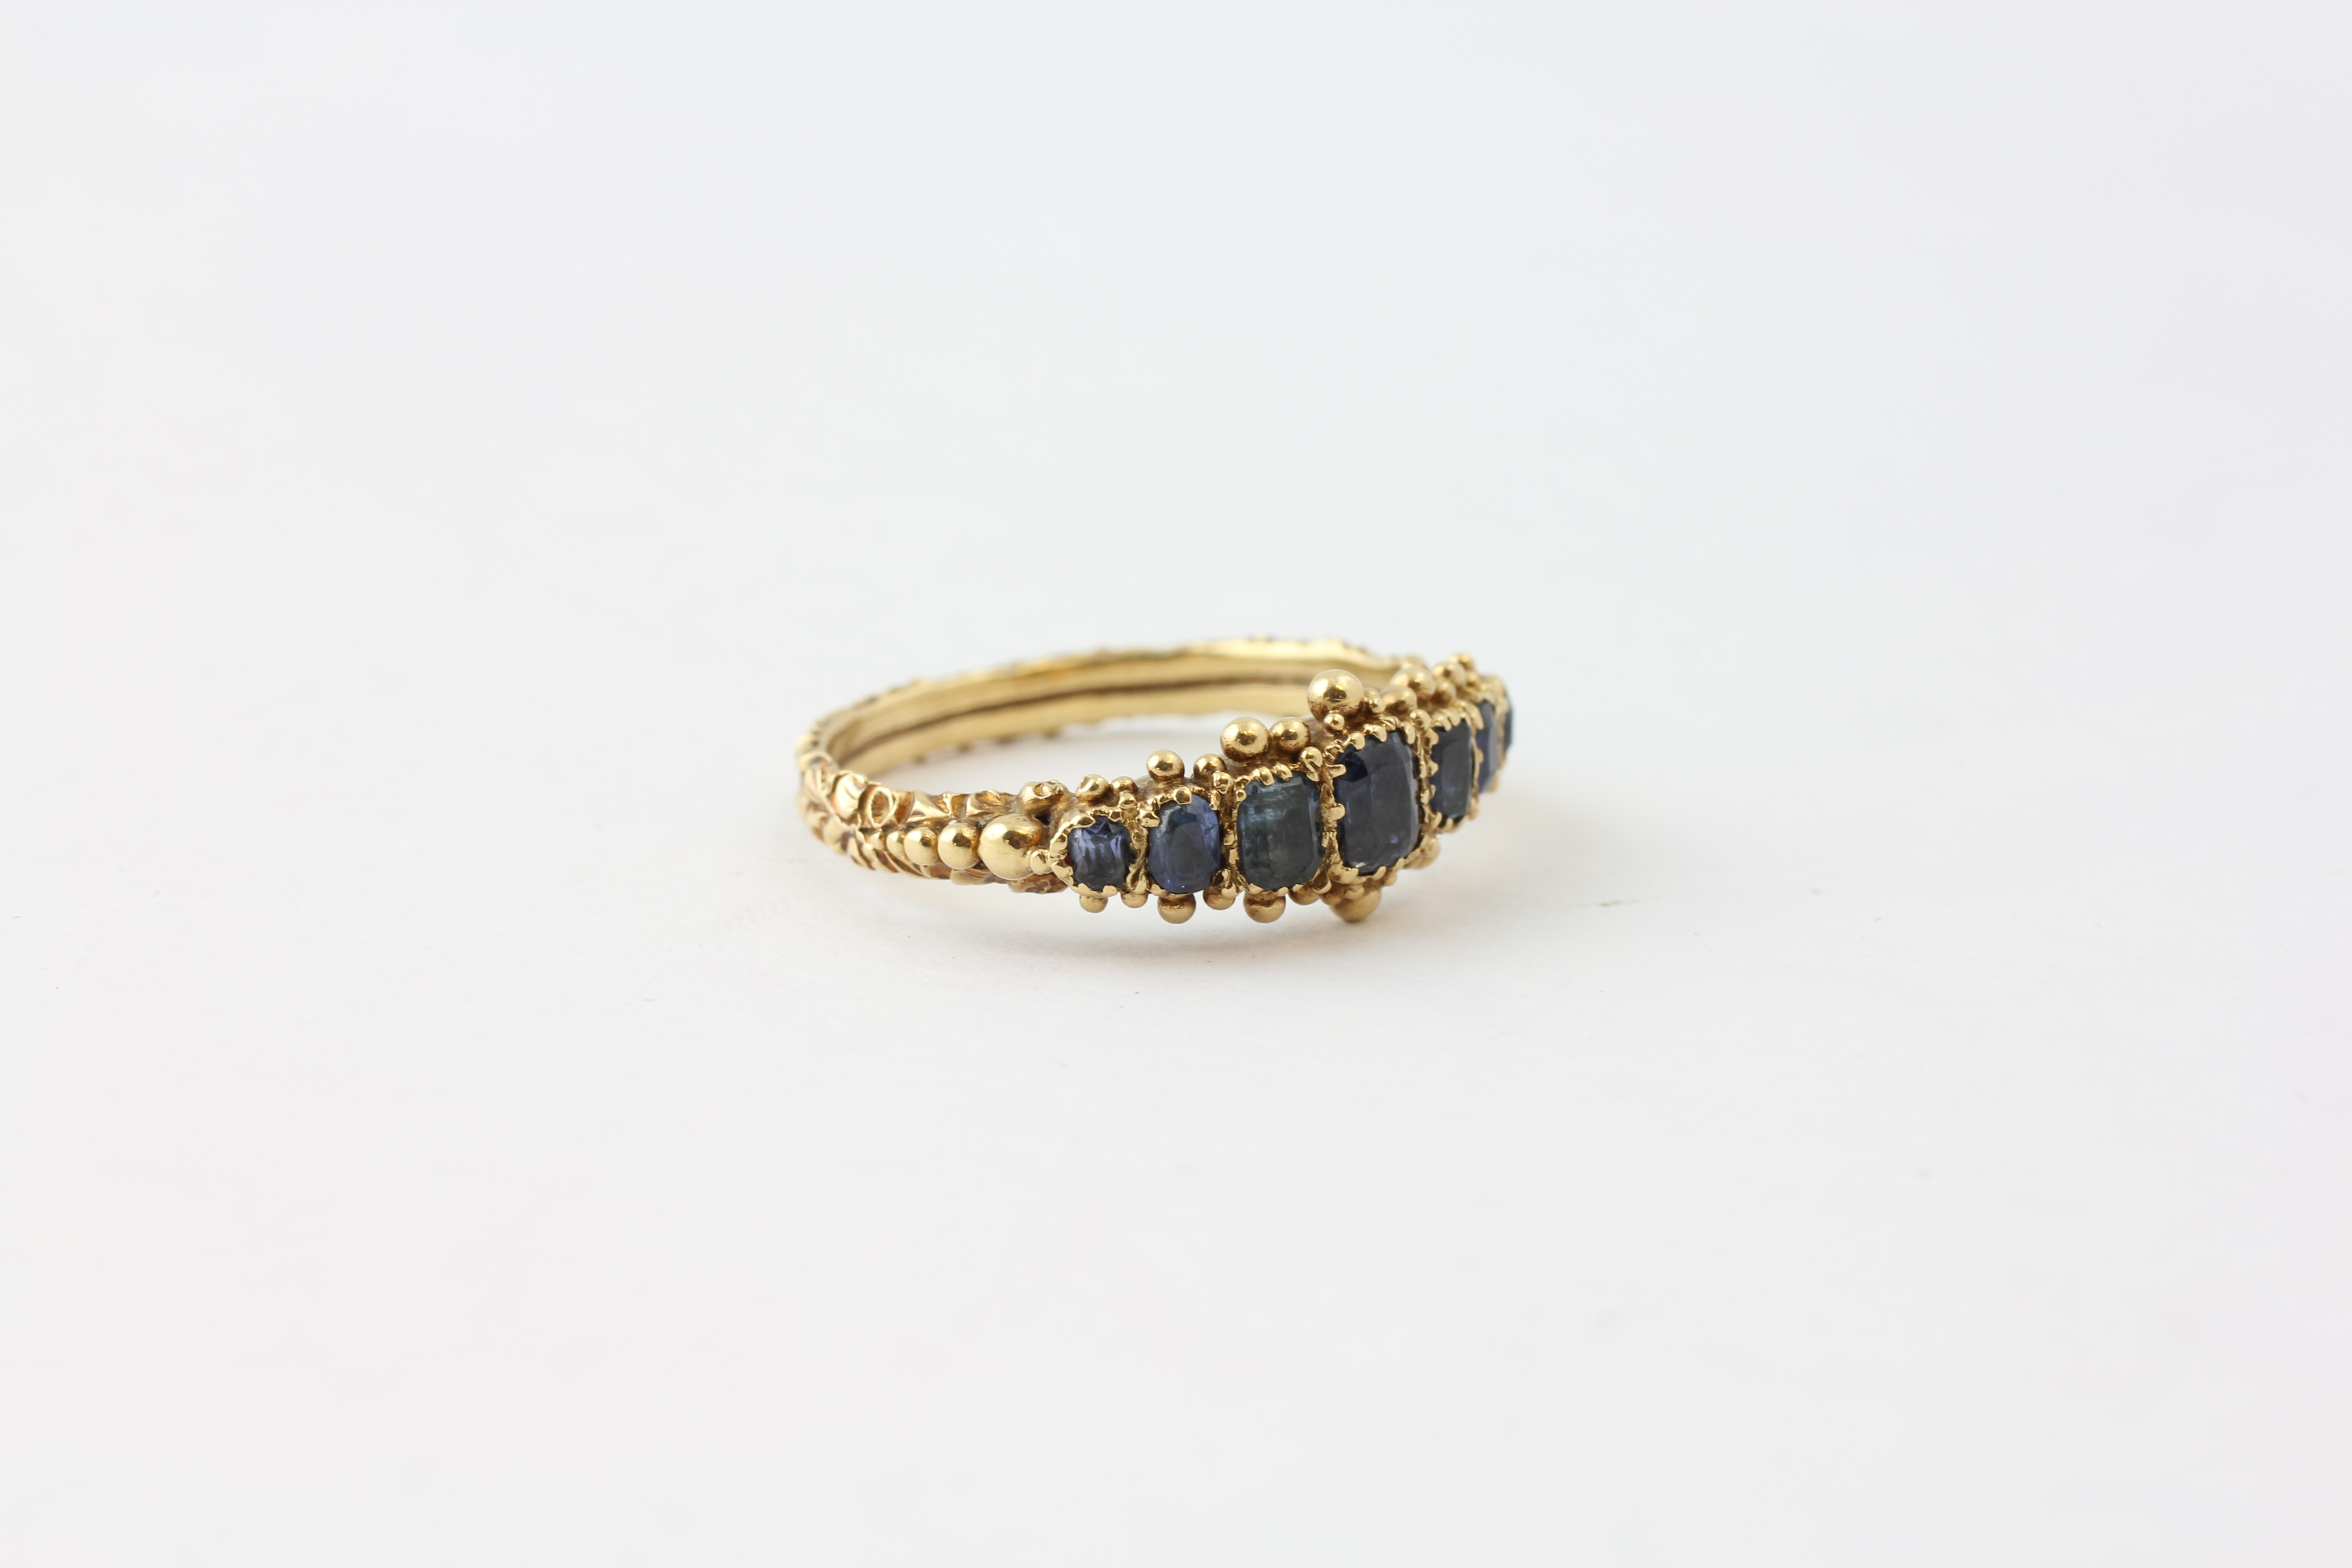 A SAPPHIRE RING, FIVE GRADUATED STONES, CLAW SET IN UNMARKED GOLD, THE LARGEST STONE APPROX. - Image 2 of 5